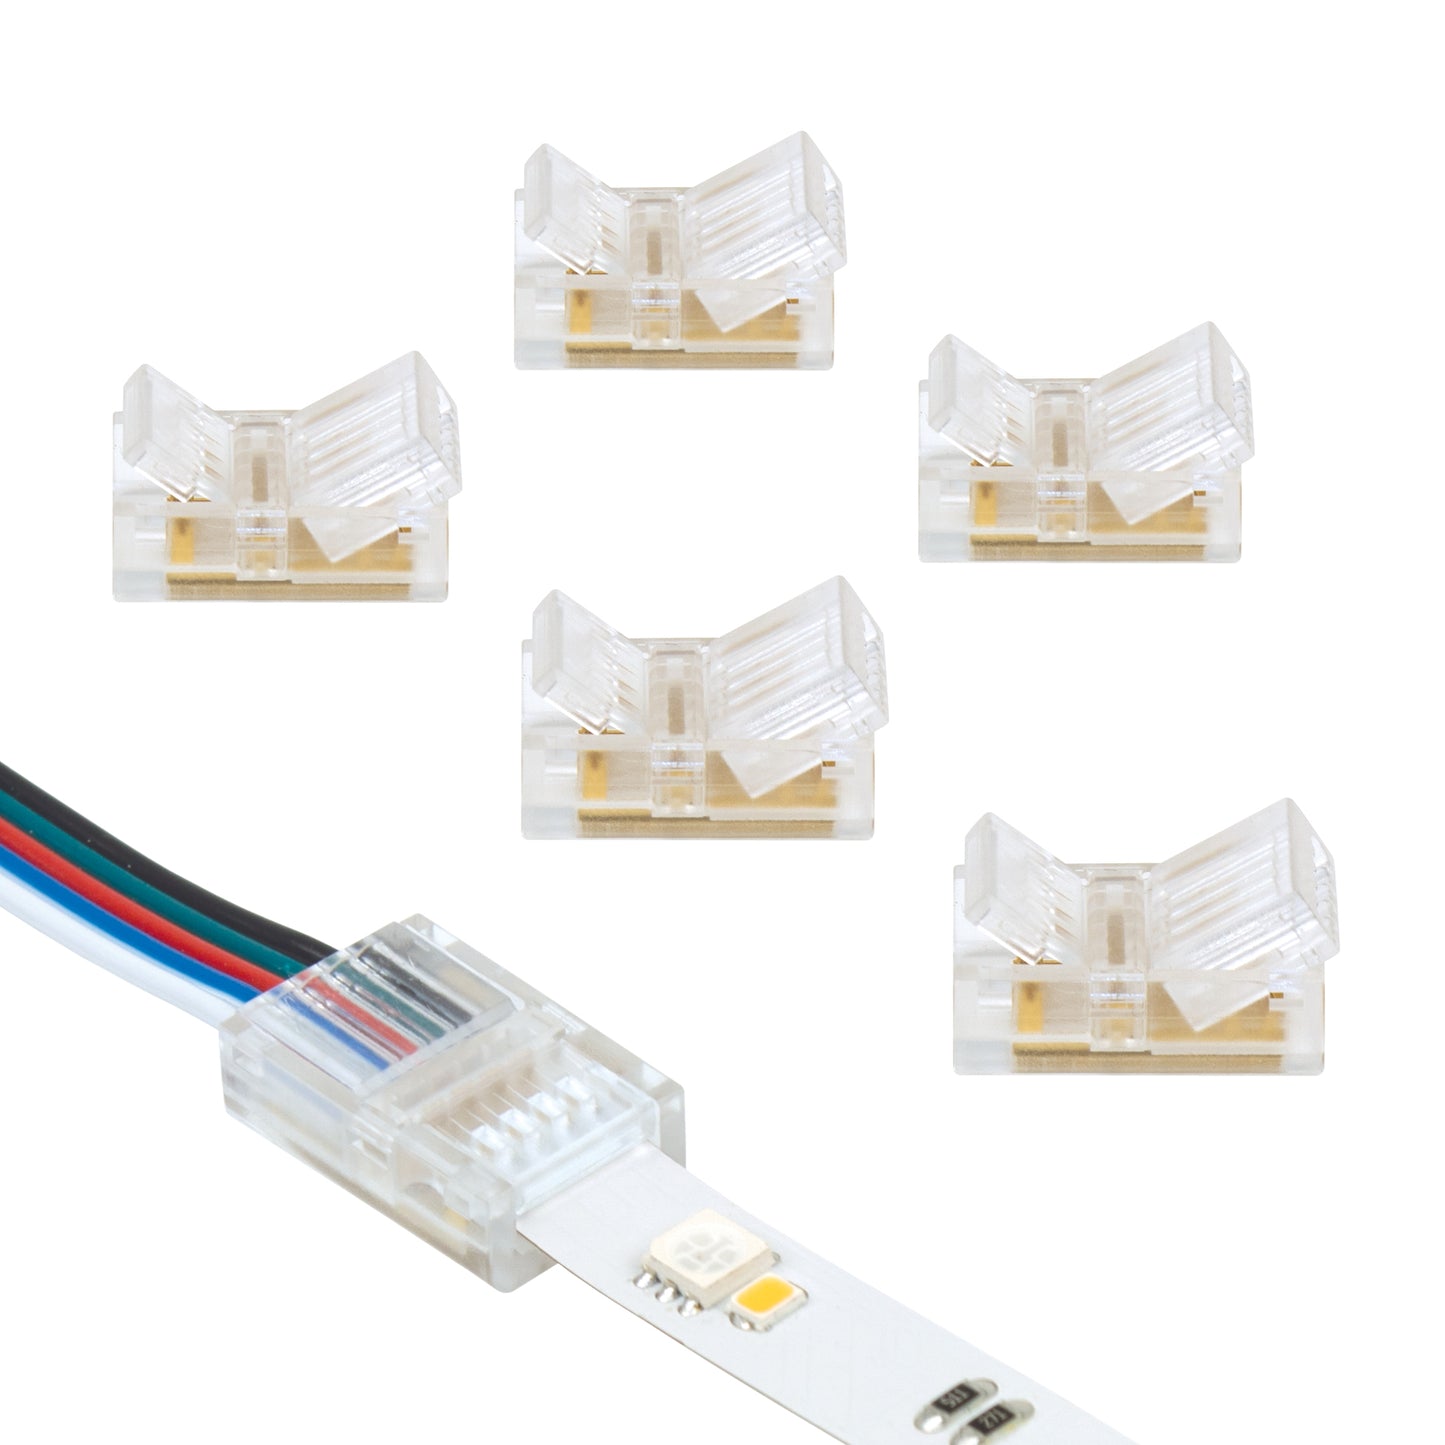 5C Strip RGB+W to Tape Connector Armacost Lighting